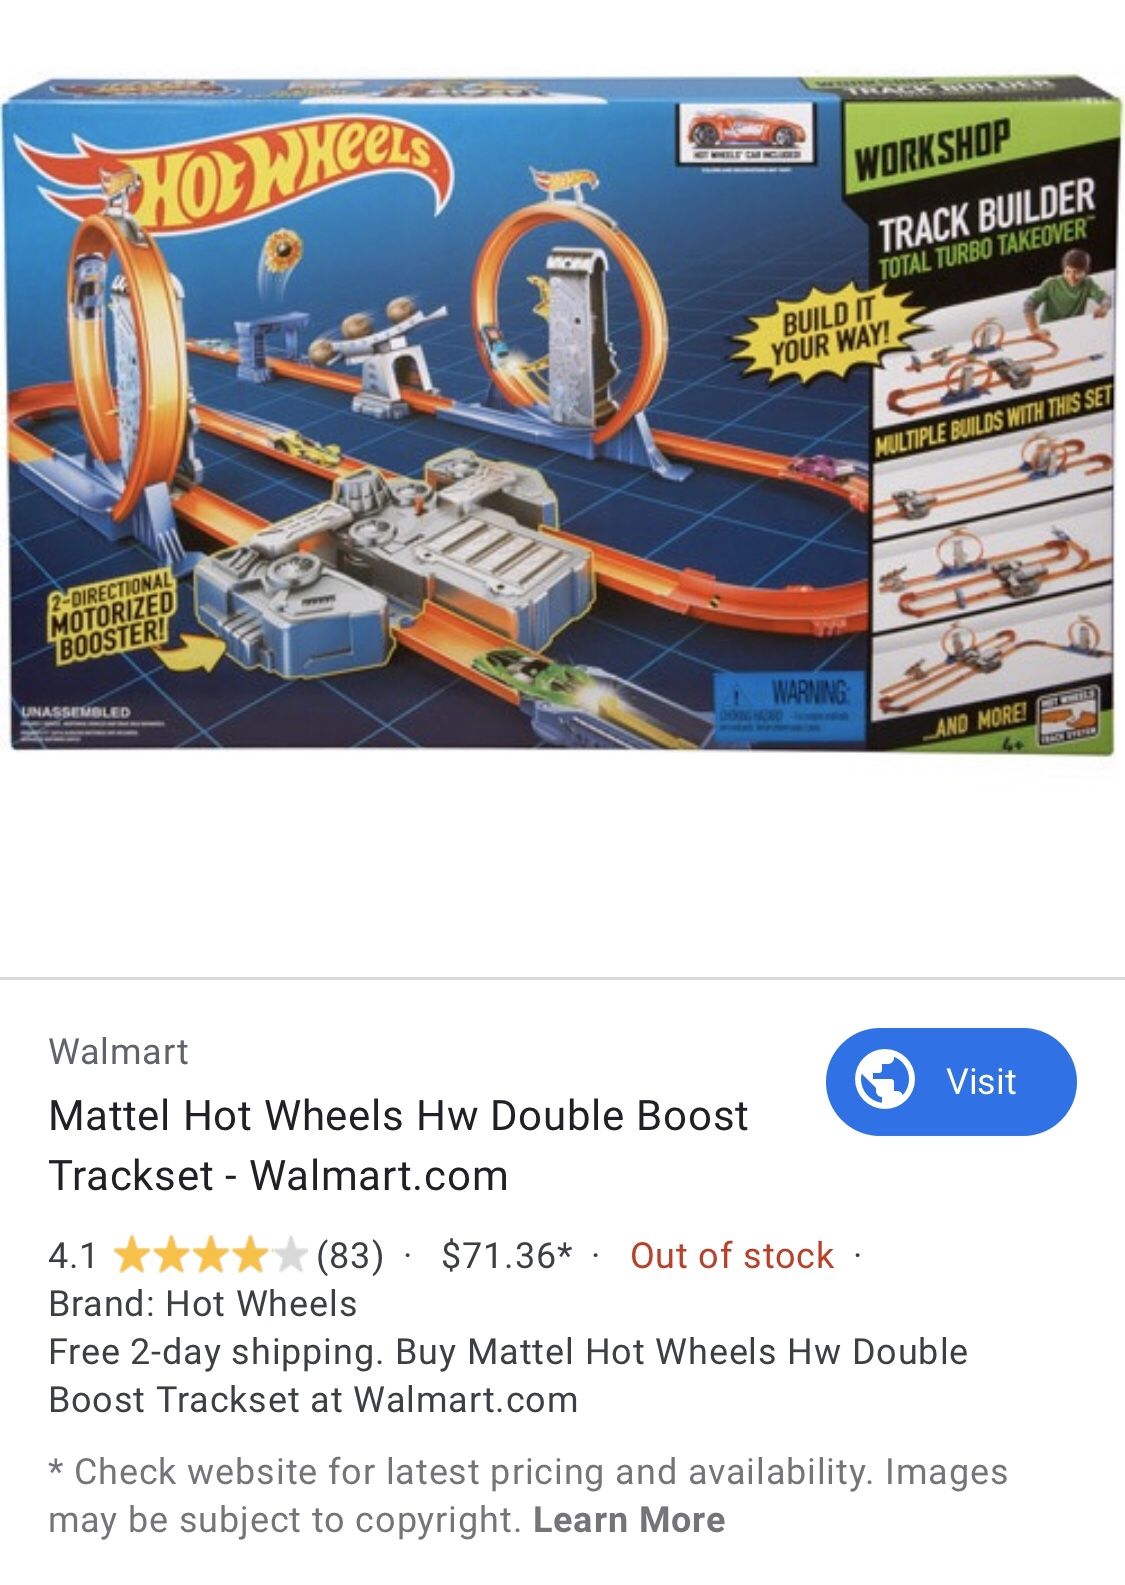 New (open box): Hot Wheels Workshop Total Turbo Takeover motorized track set